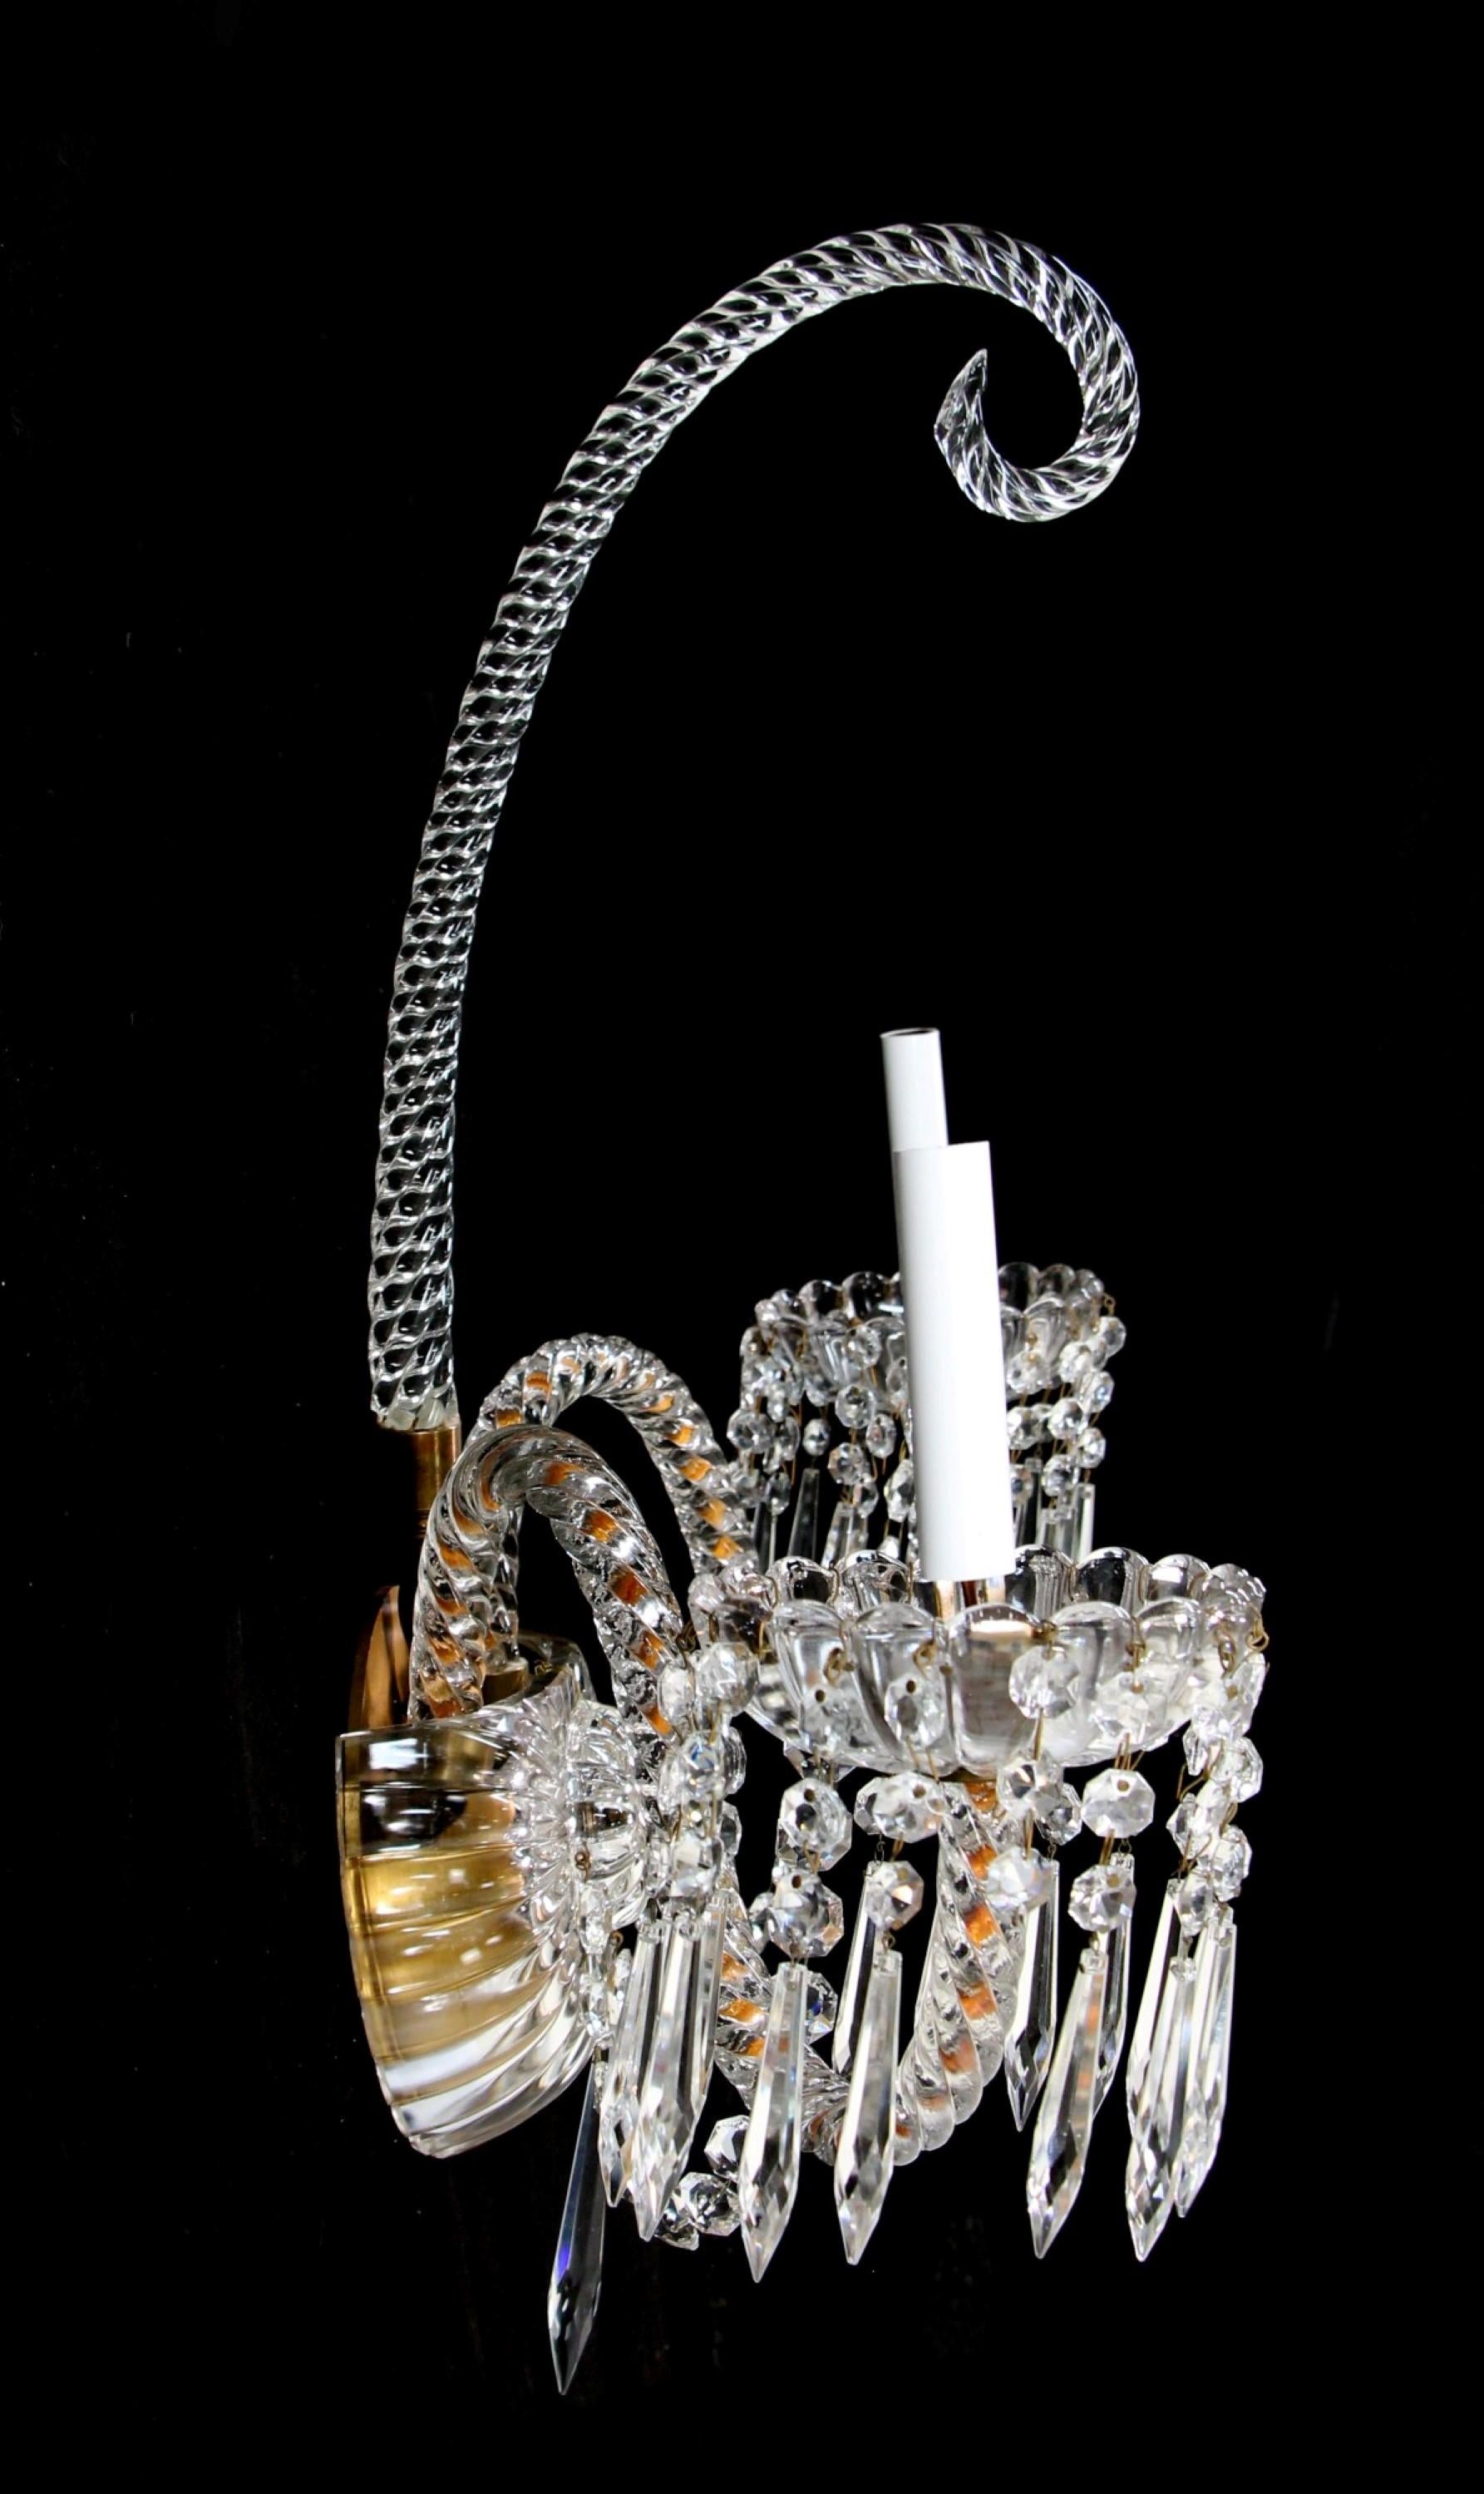 Crystal Sconce Hotel Pennsylvania, NYC Quantity Available 2